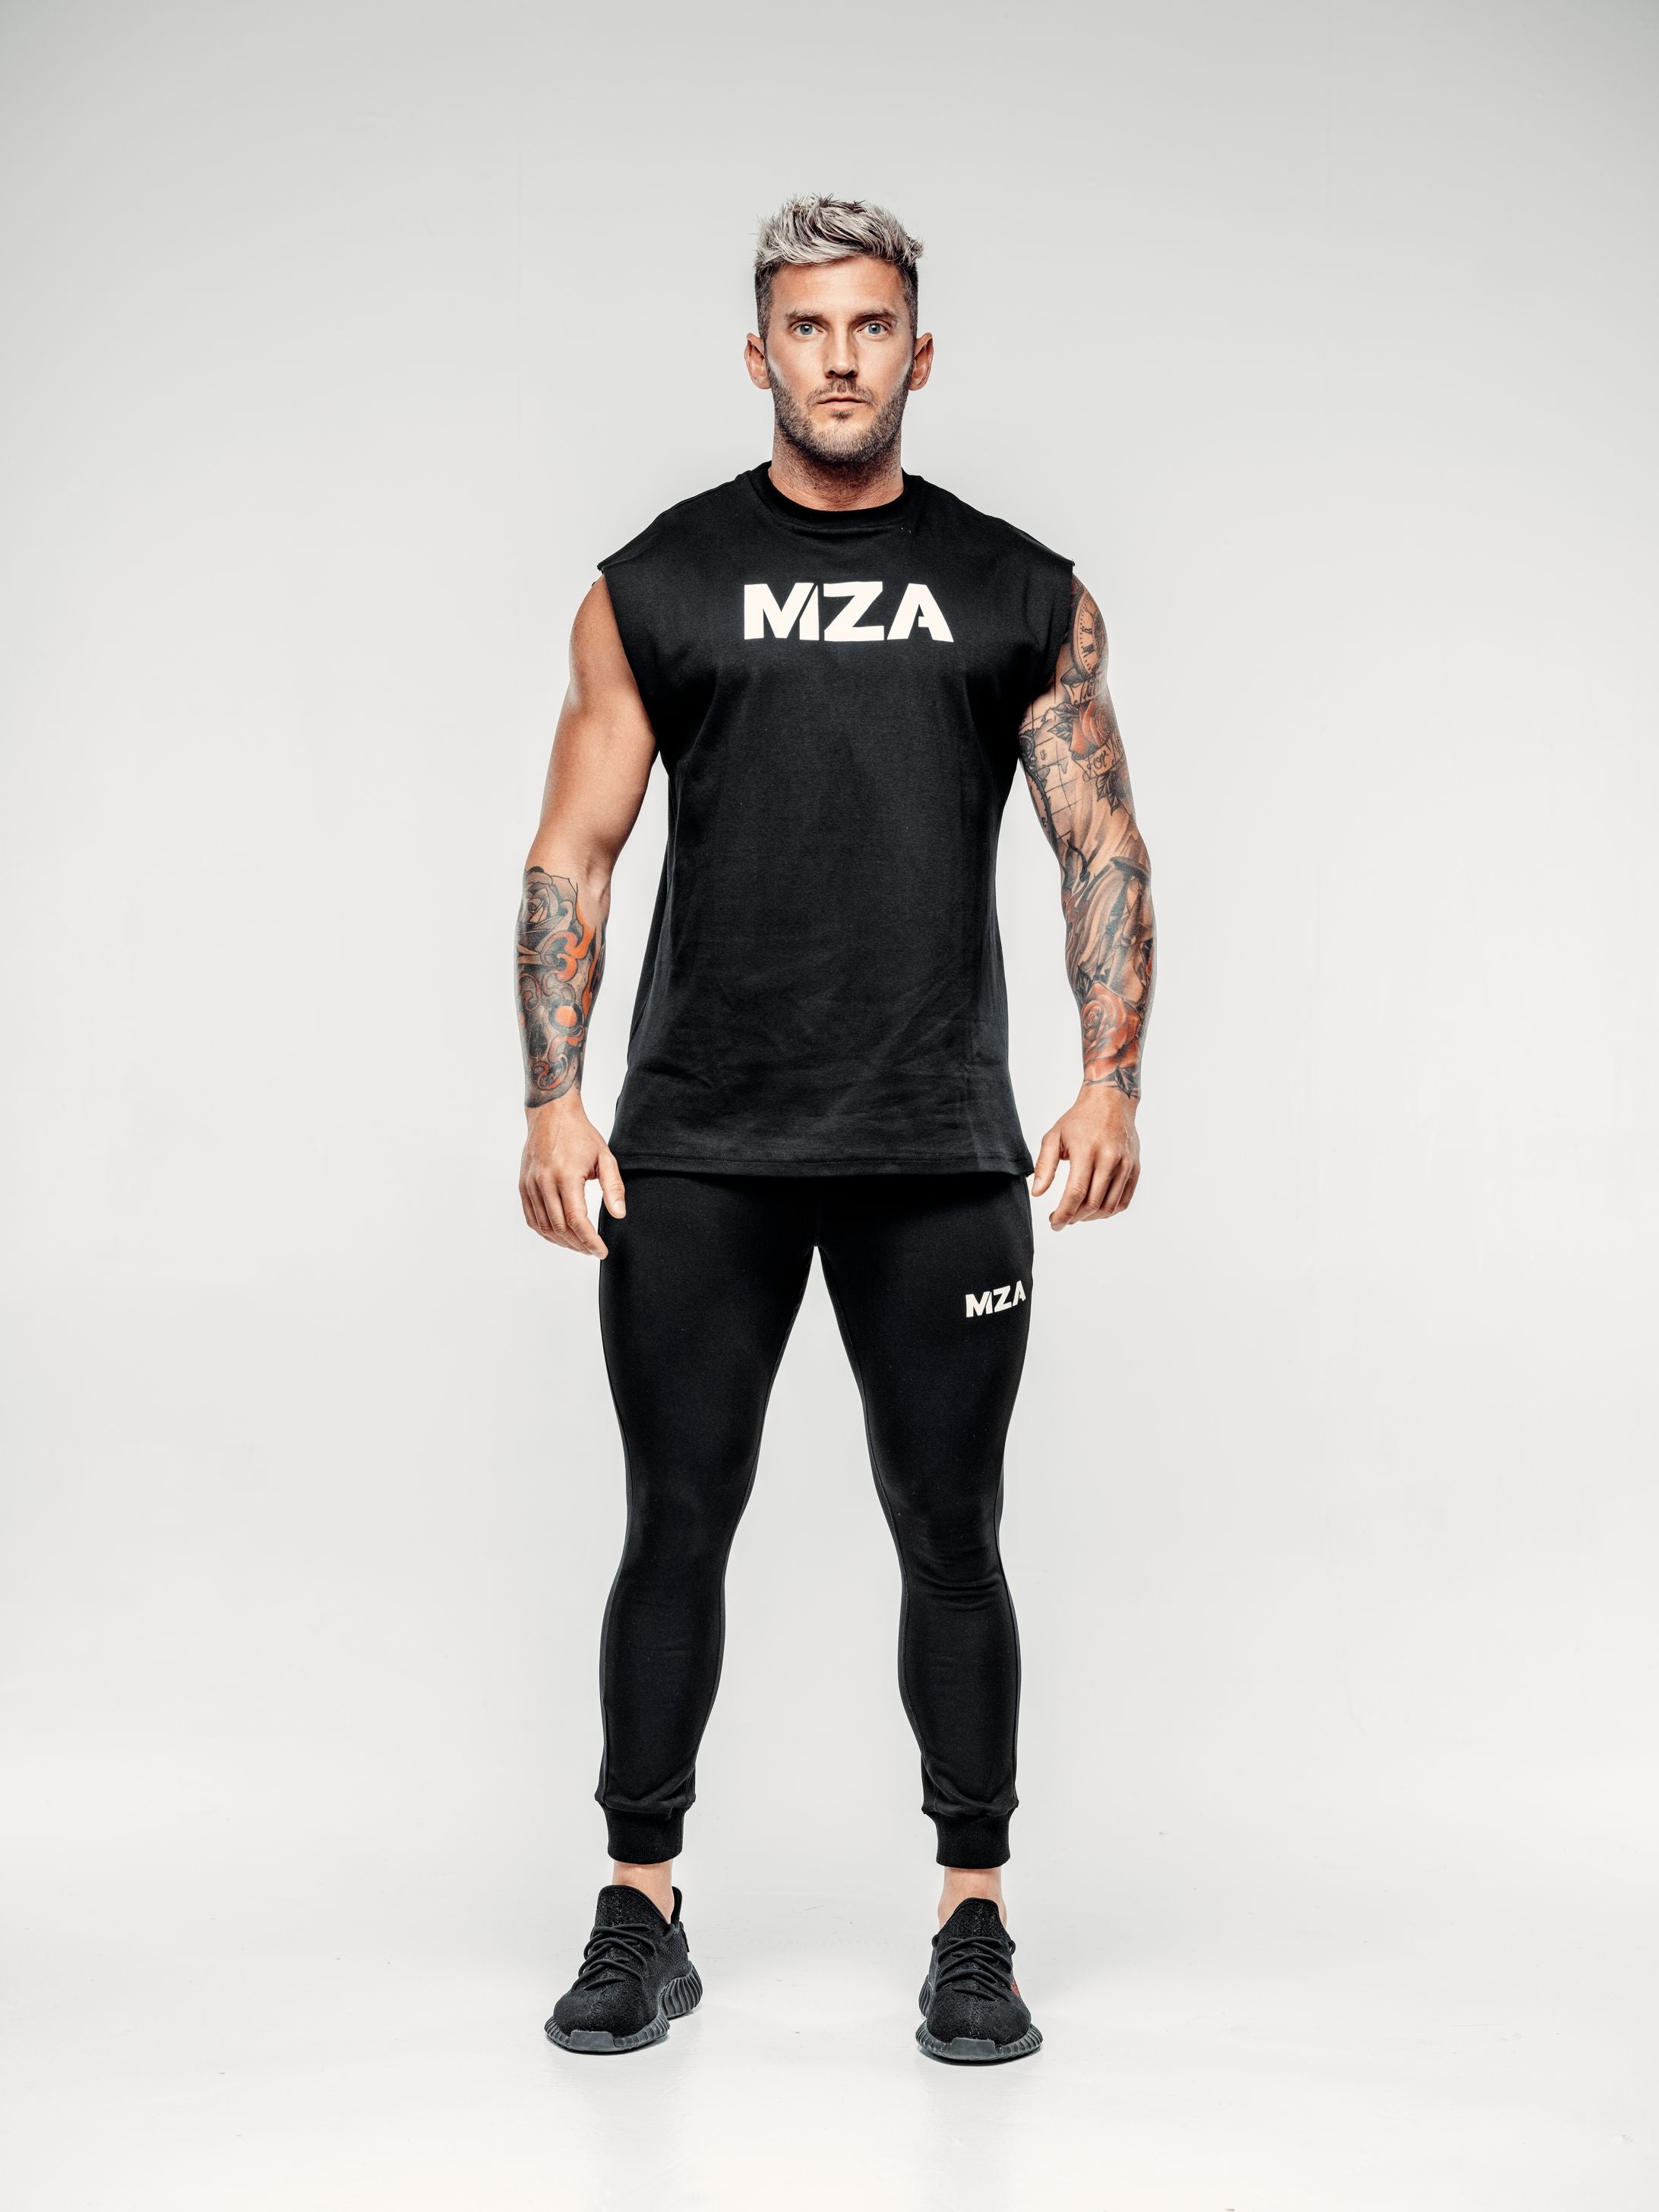 This is a full body shot of Shane wearing the new standard vest in black paired with the new standard joggers in black